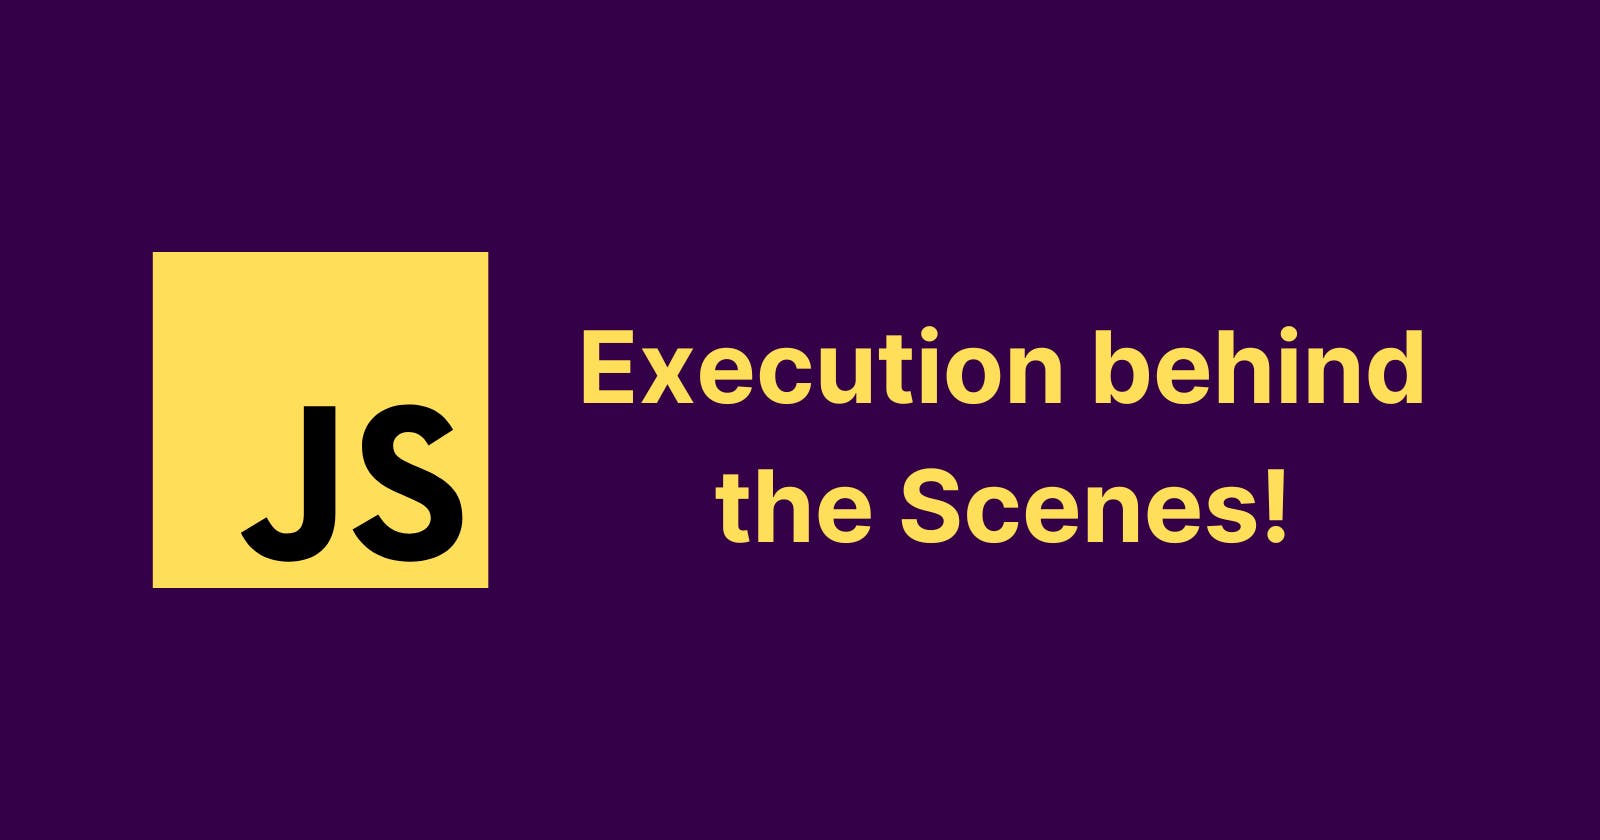 JavaScript Code Execution Behind the Scenes